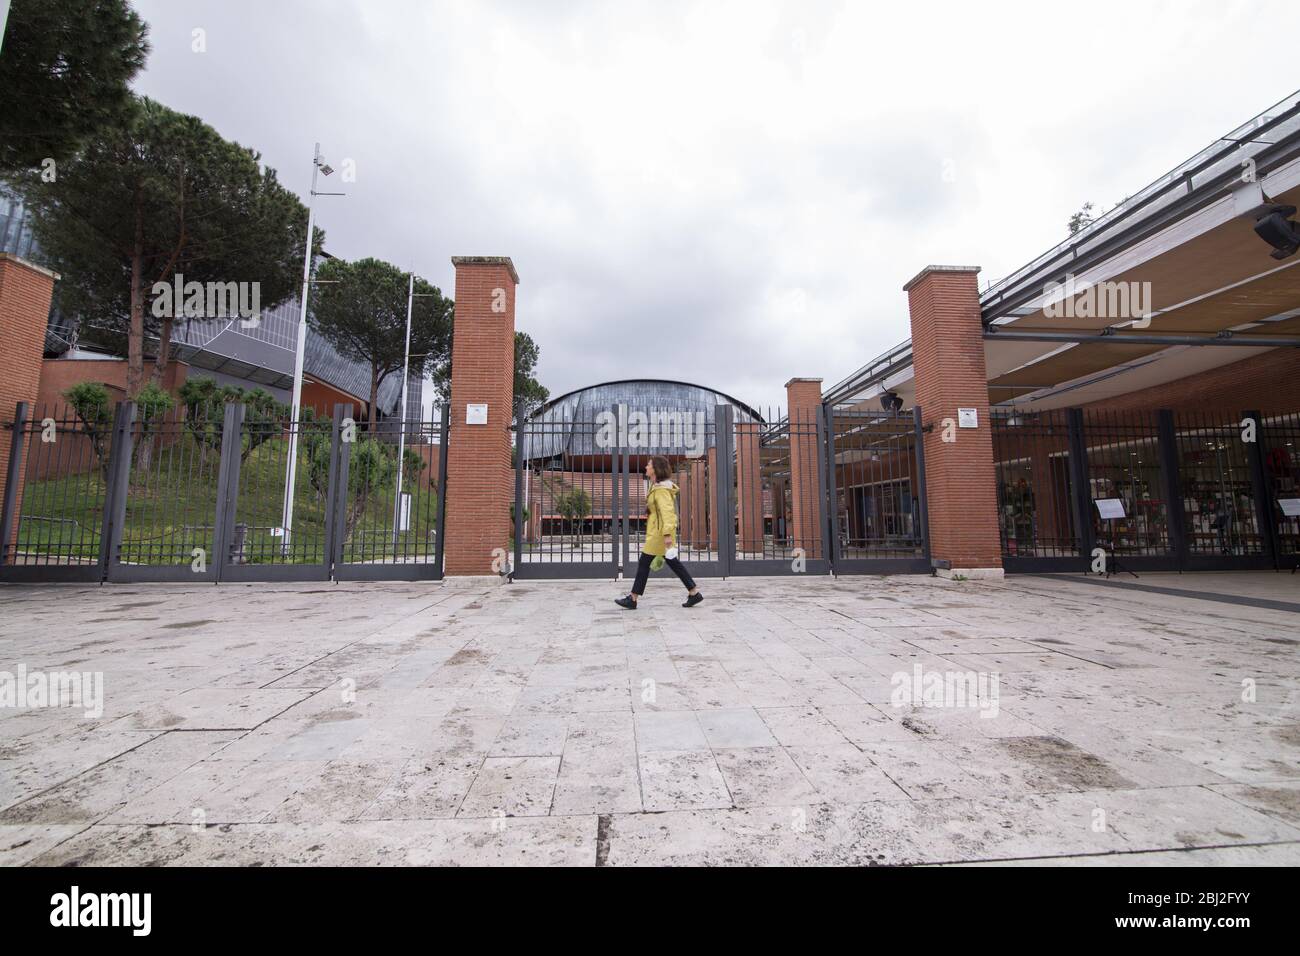 Roma, Italy. 28th Apr, 2020. View of the closed entrance of Auditorium Parco della Musica in Rome (Photo by Matteo Nardone/Pacific Press) Credit: Pacific Press Agency/Alamy Live News Stock Photo